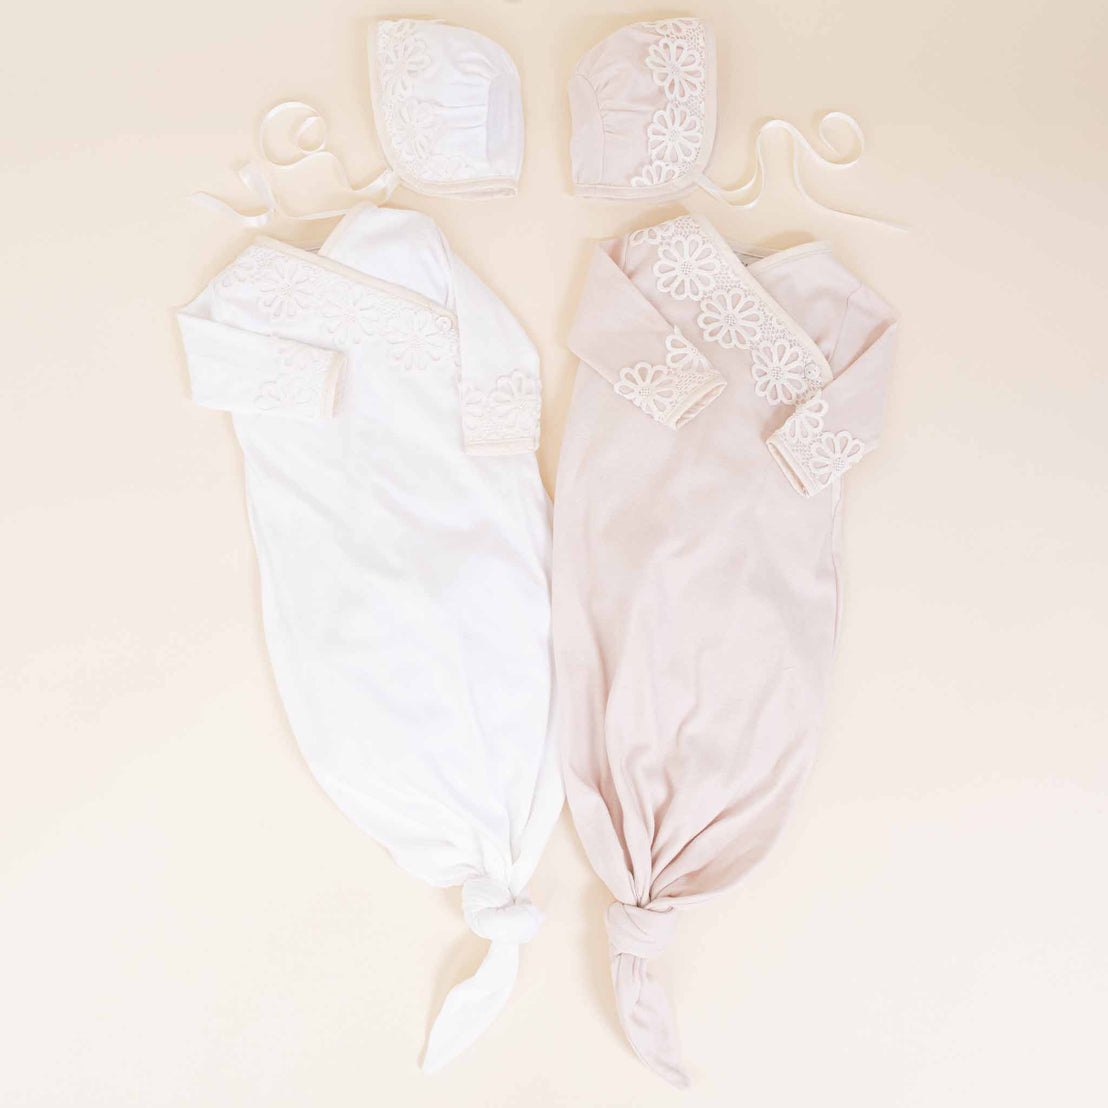 Sentence with product name: Two Hannah Newborn Gift Sets, displayed symmetrically on hangers, featuring delicate lace details and heirloom qualities, with one outfit in white and the other in soft pink, perfect as a coming.